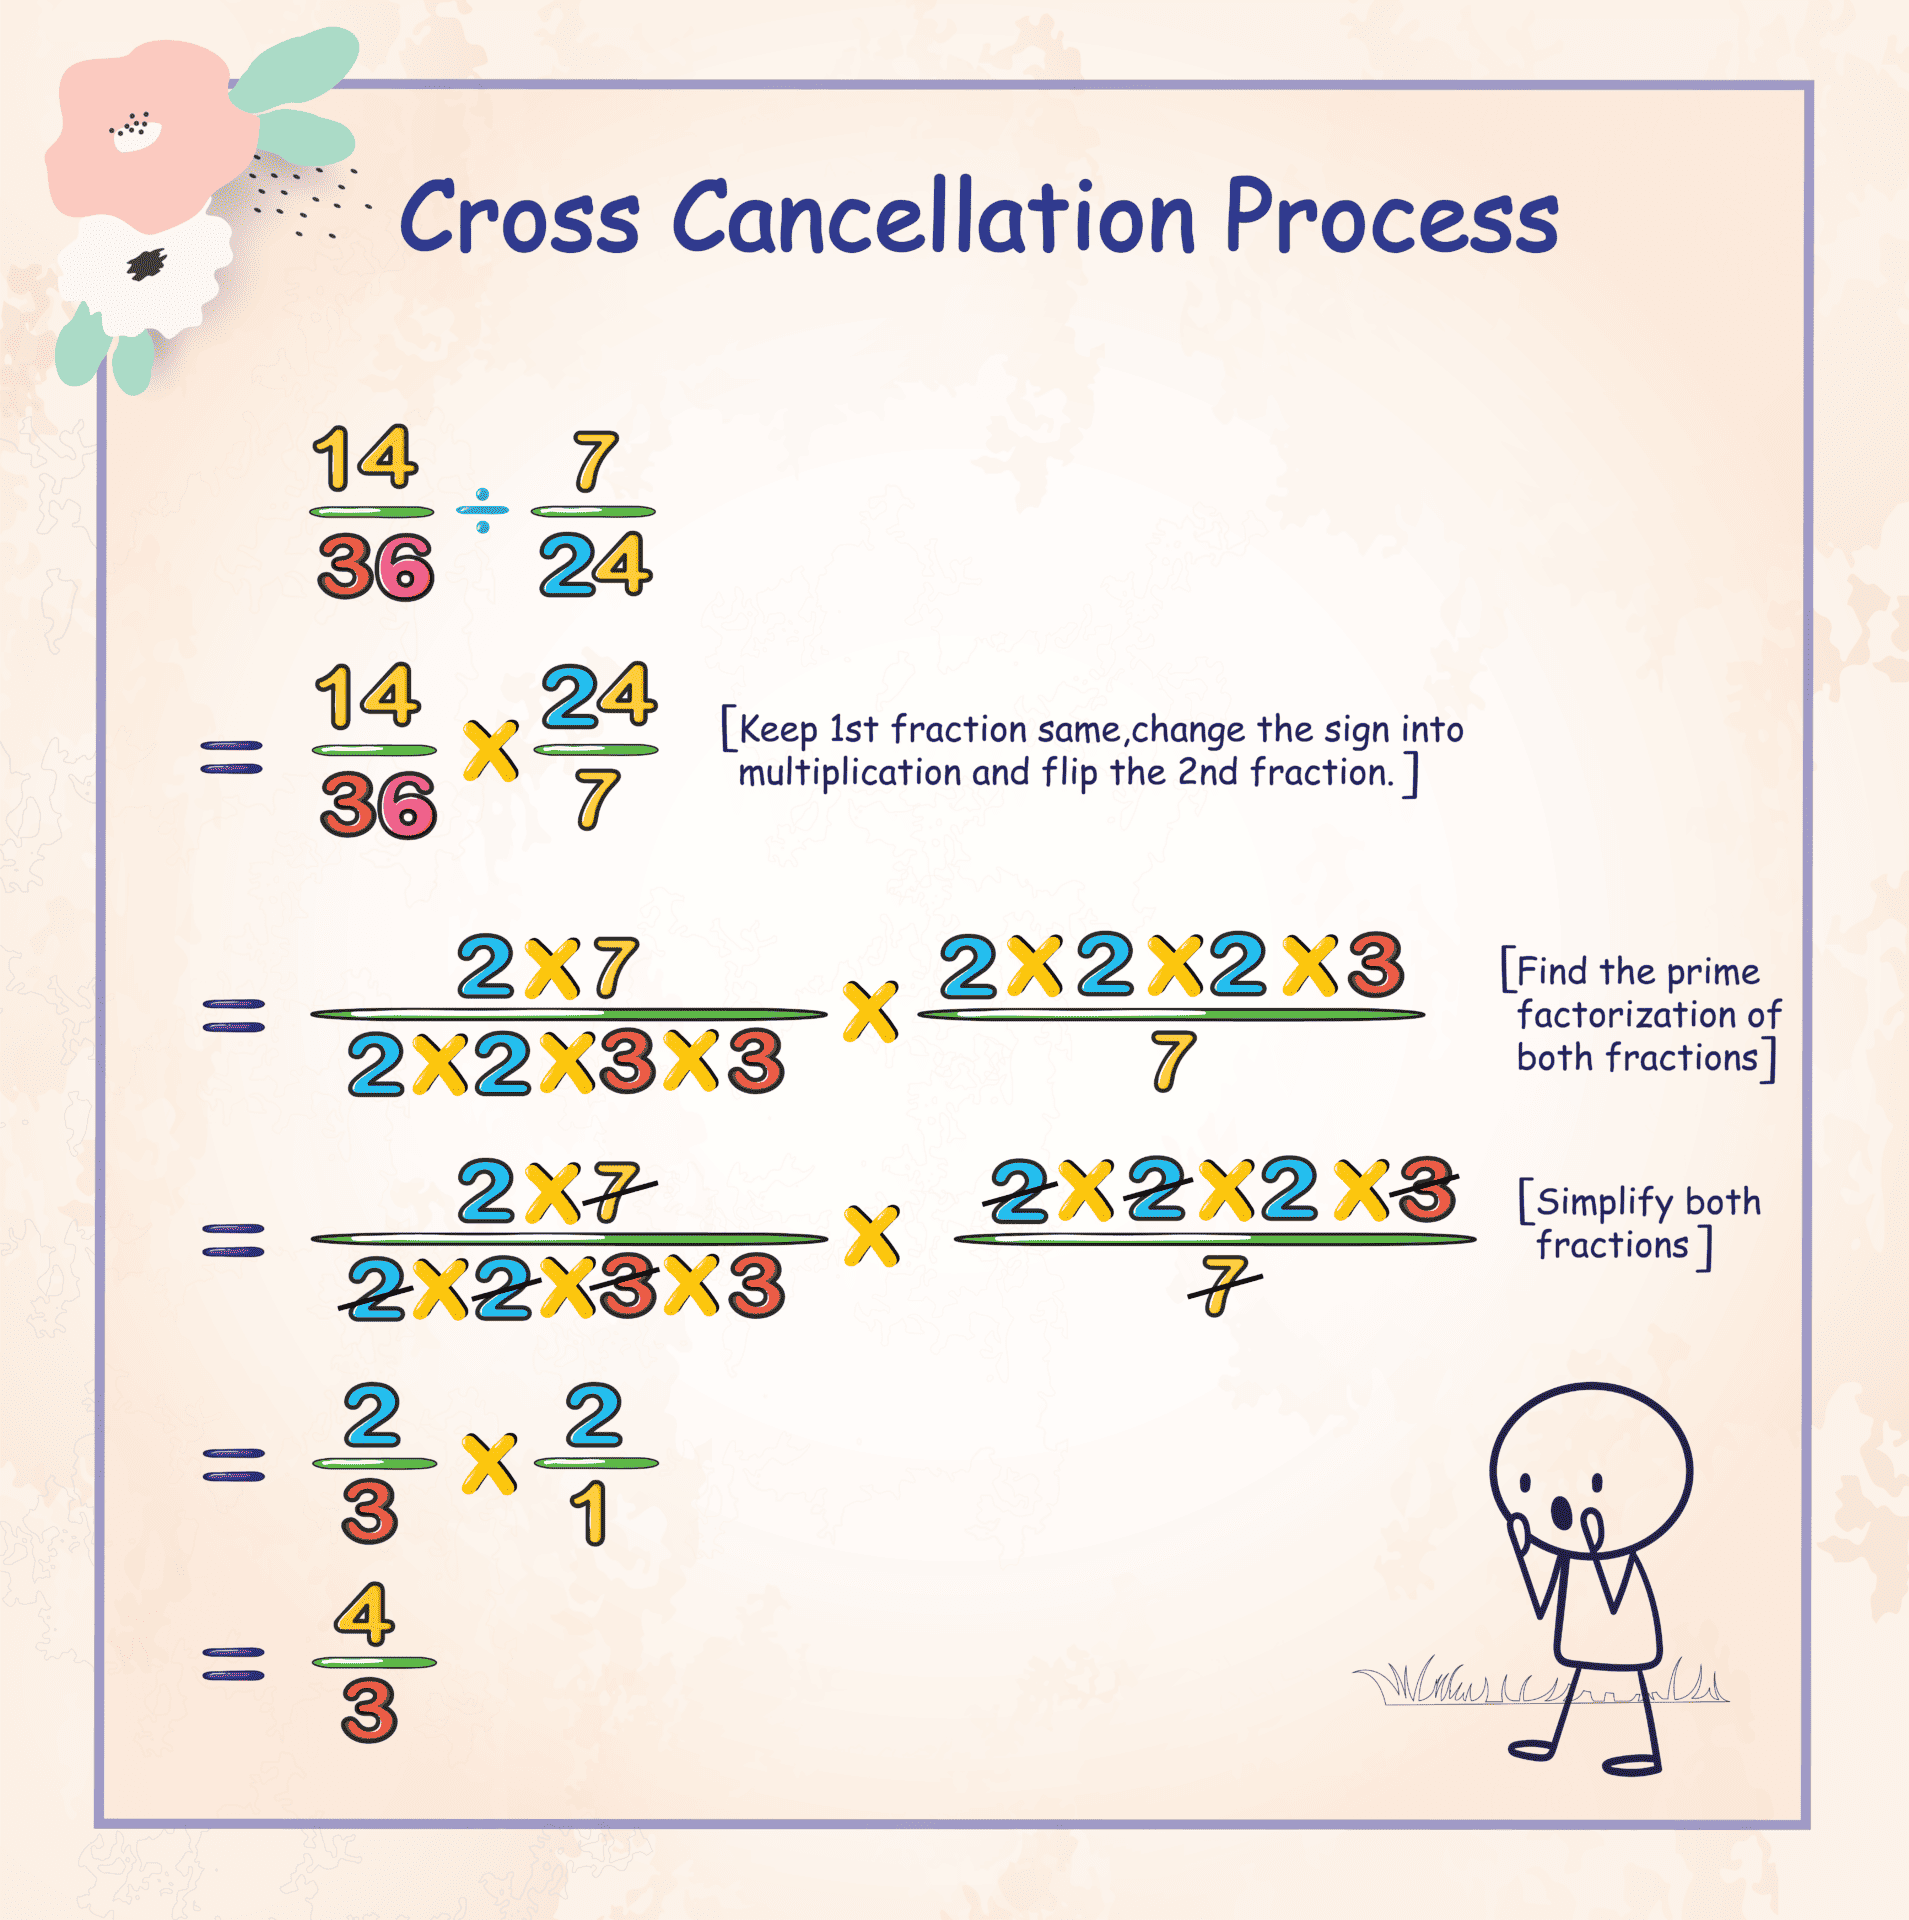 Cross cancellation process for dividing fractions by fractions word problems.